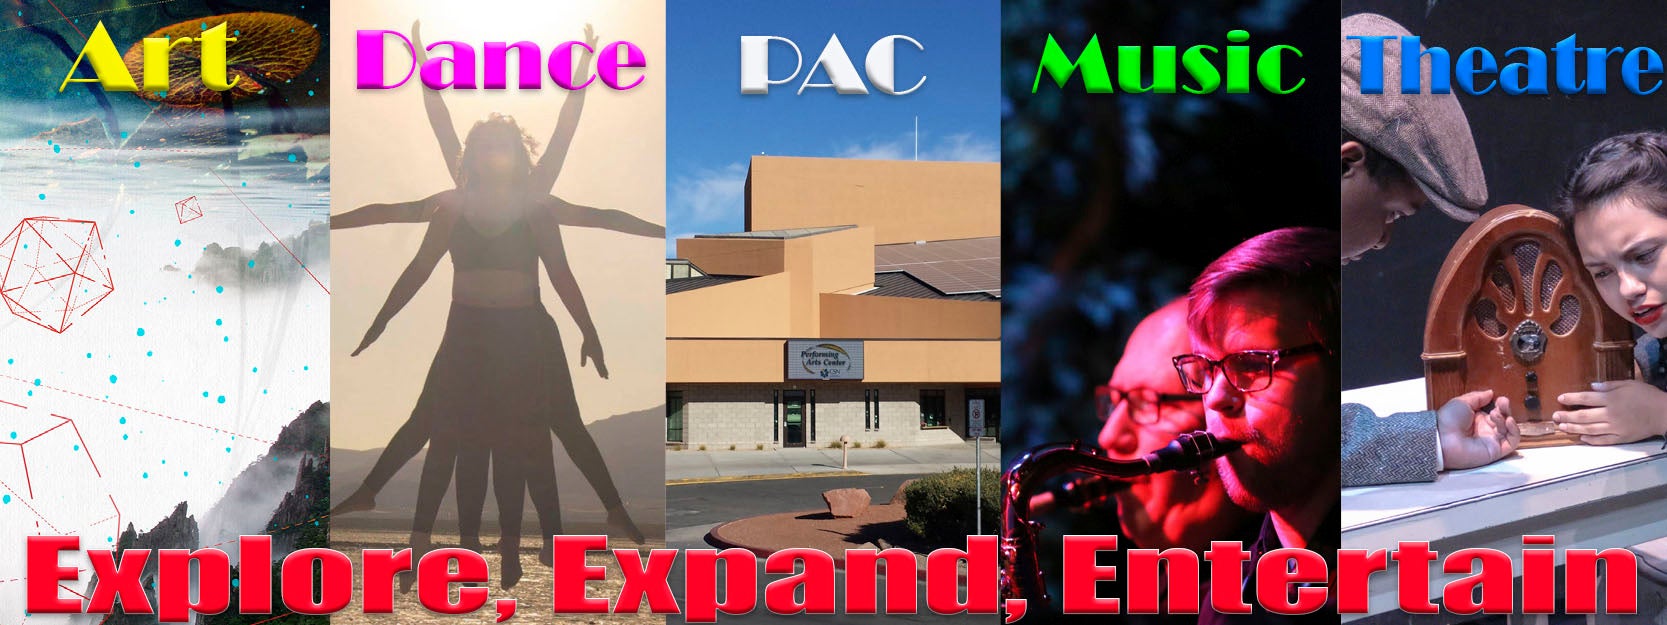 Explore and experience the performing arts